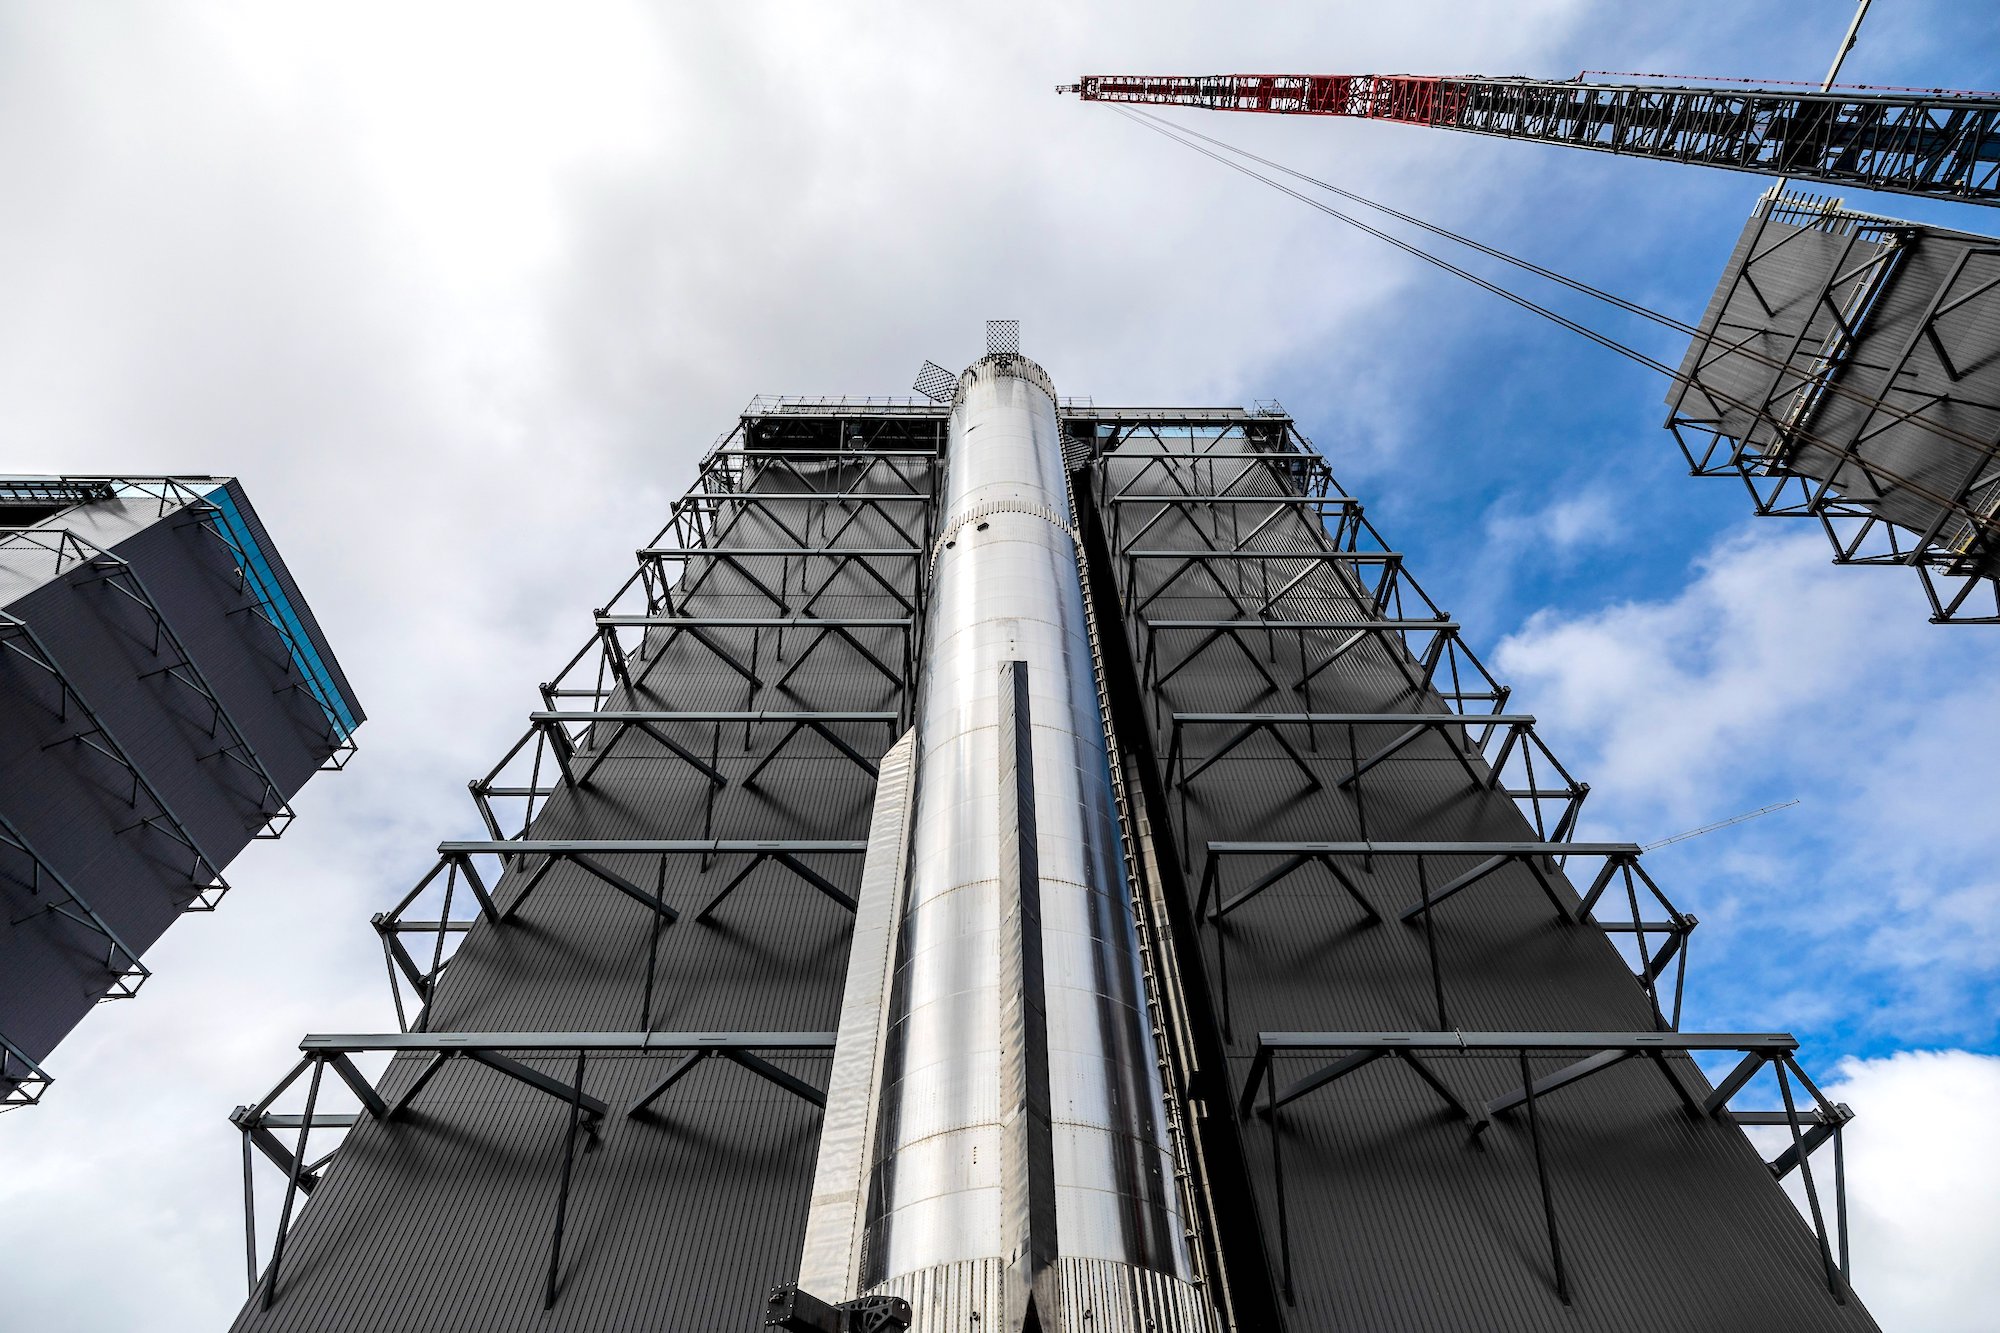 SpaceX's Super Heavy on the launchpad ahead of a test.